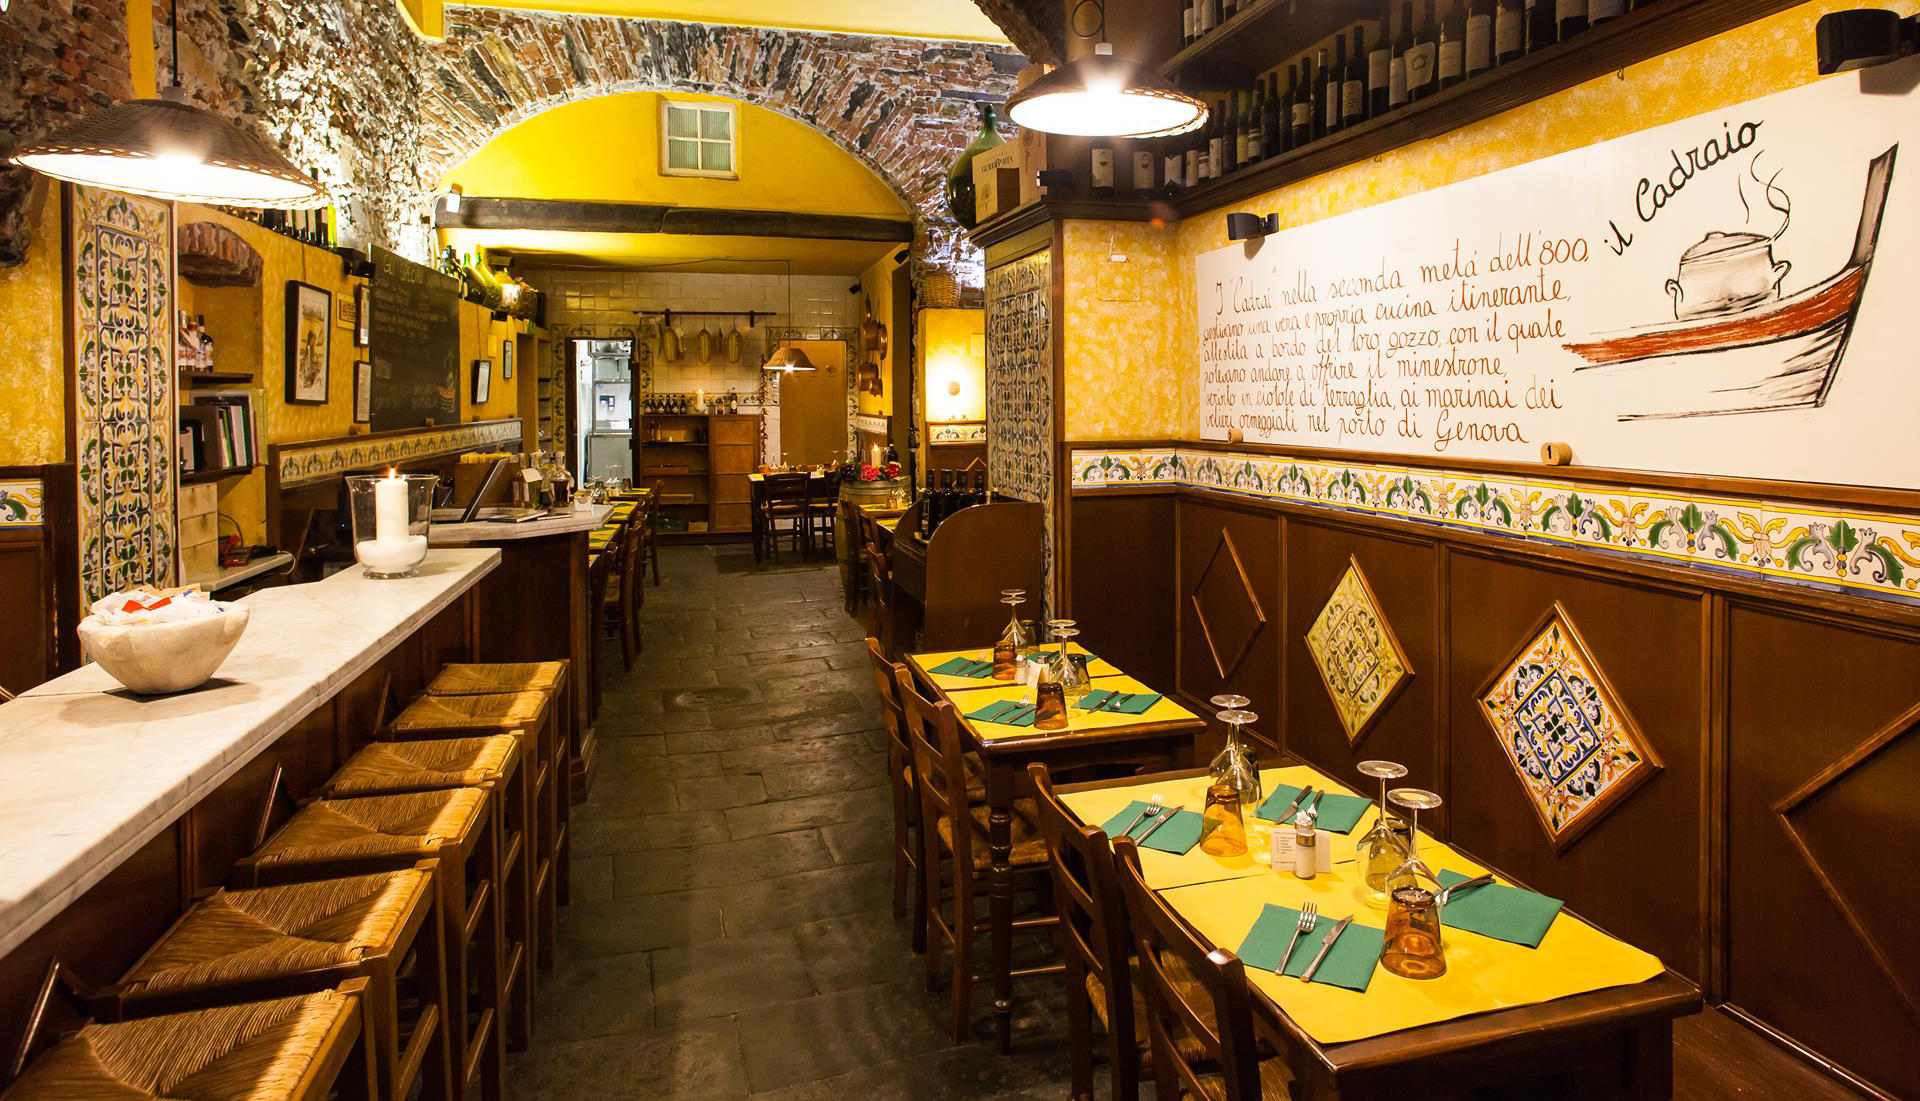 Typical genoese restaurant with traditional cuisine in Genoa